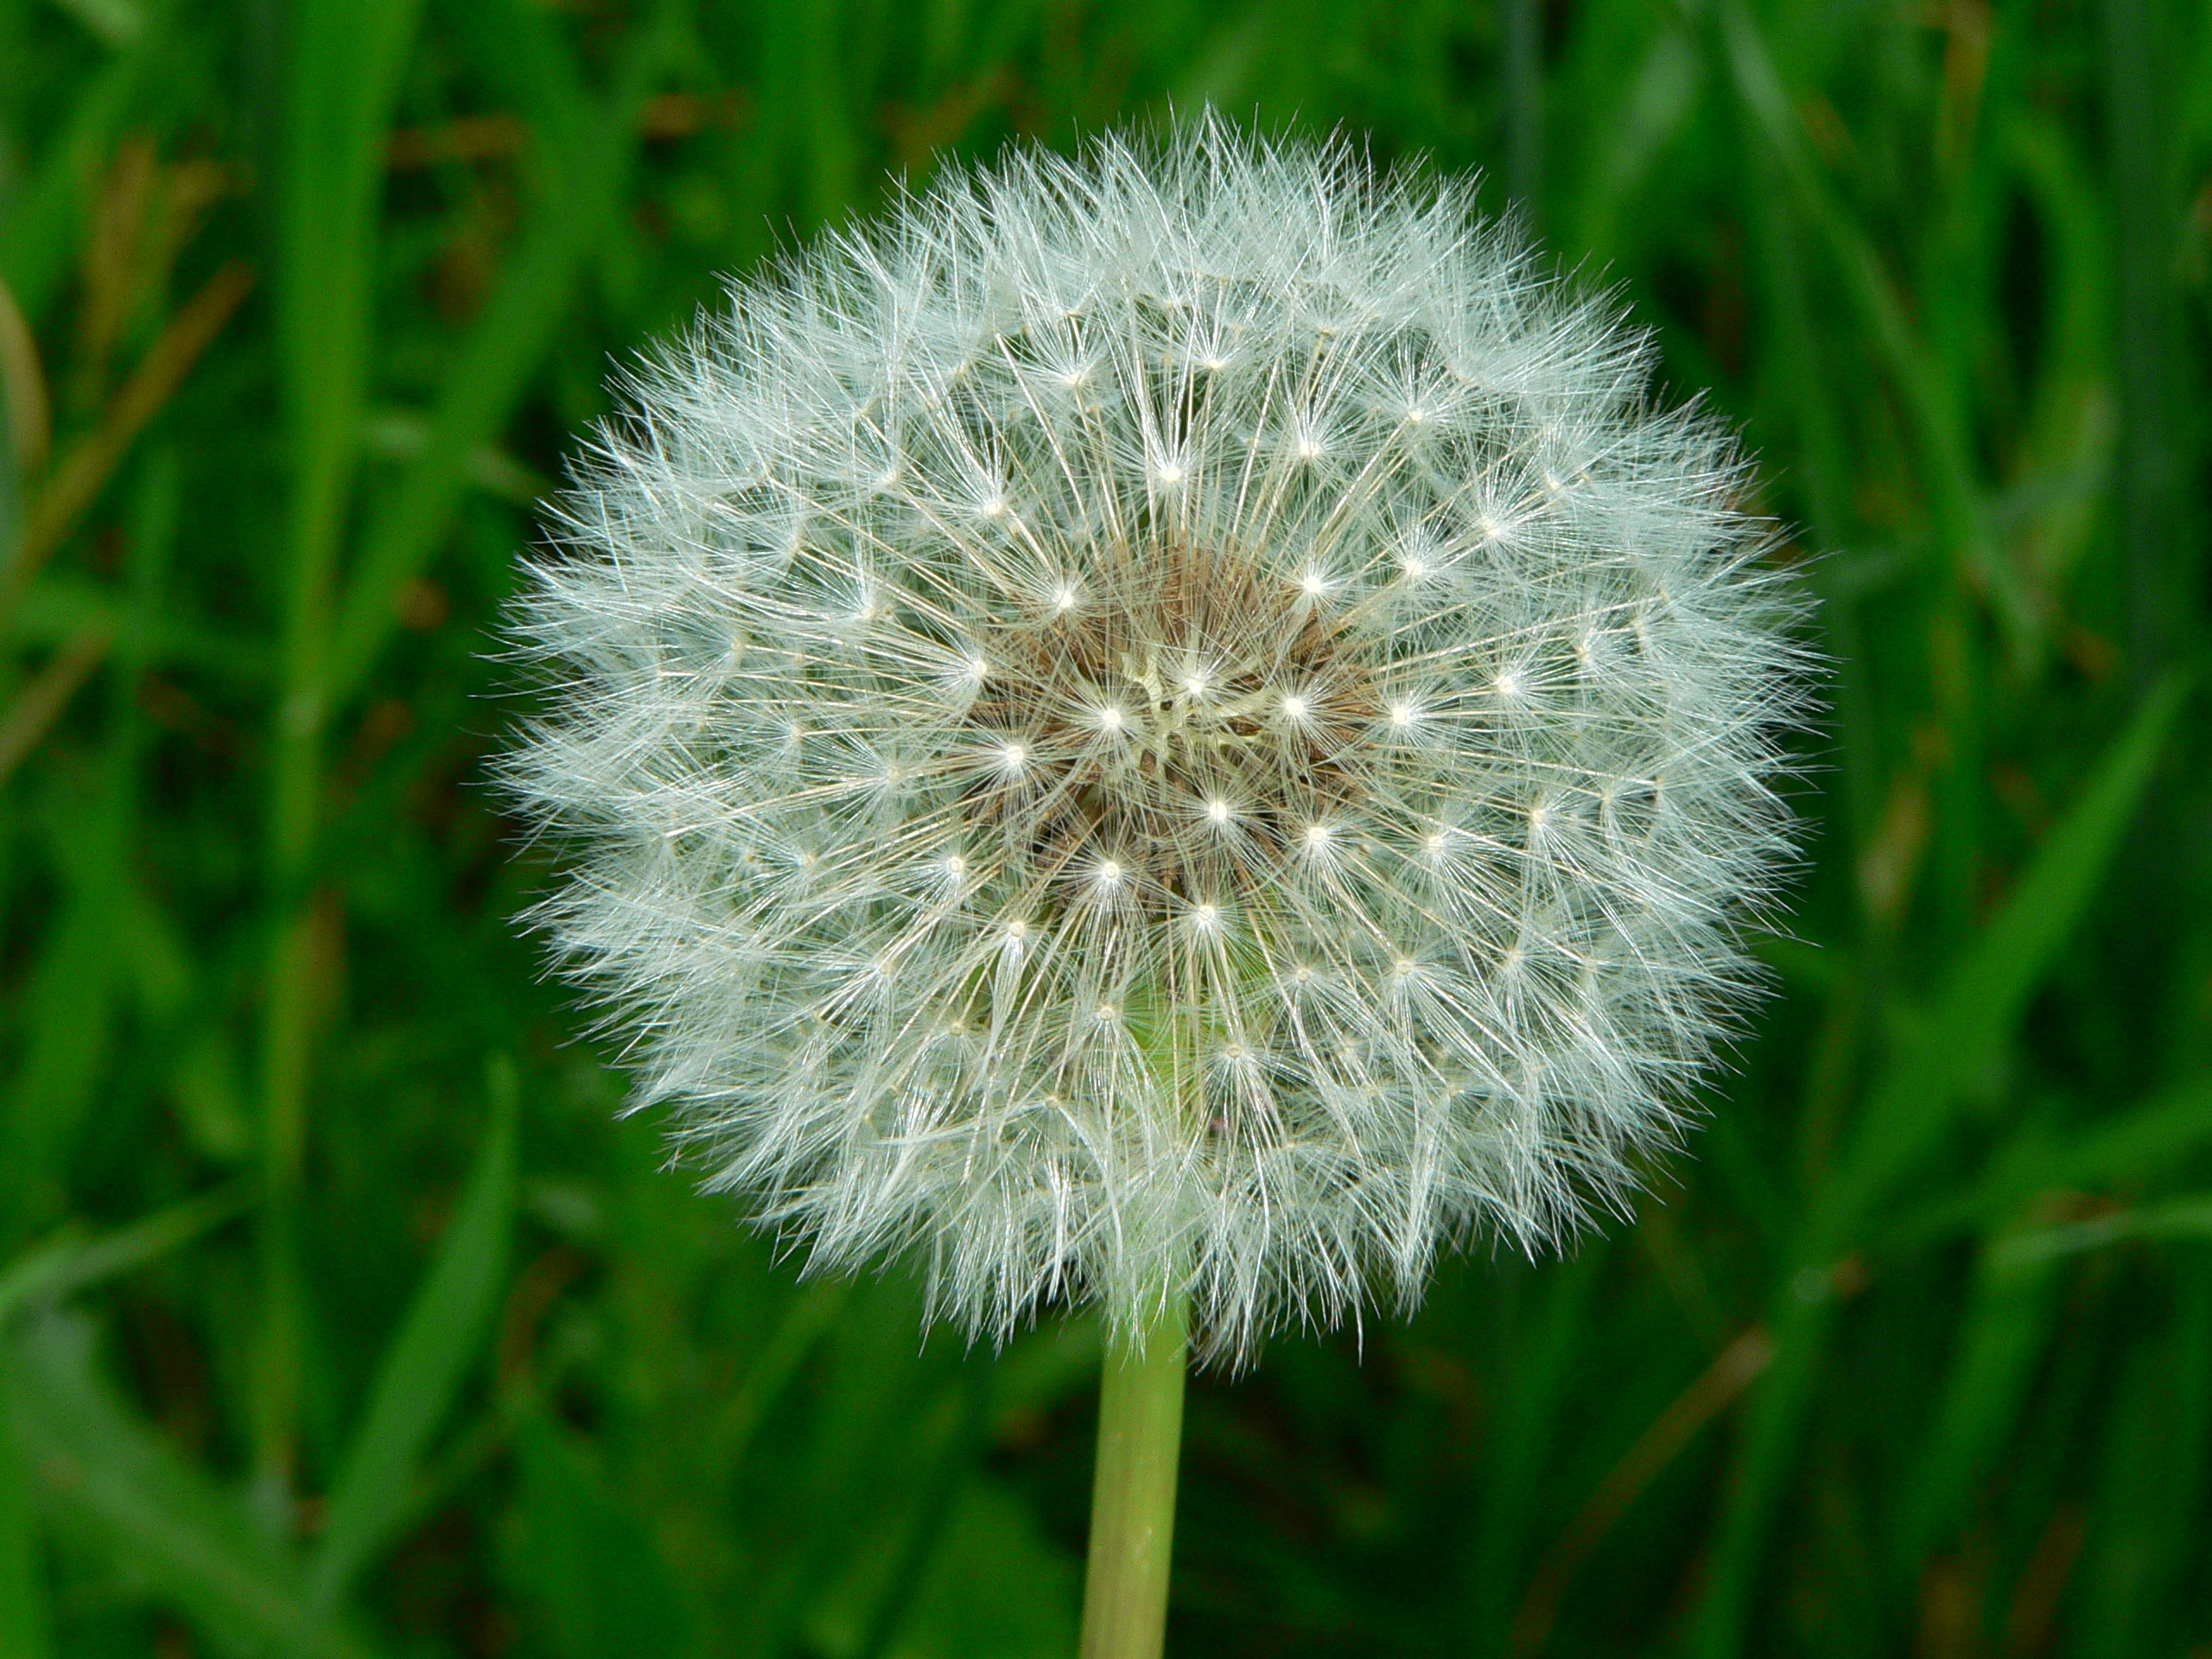 2560x1920 Download Convert View Source. Tagged on : Flower Wallpaper Dandelion ...